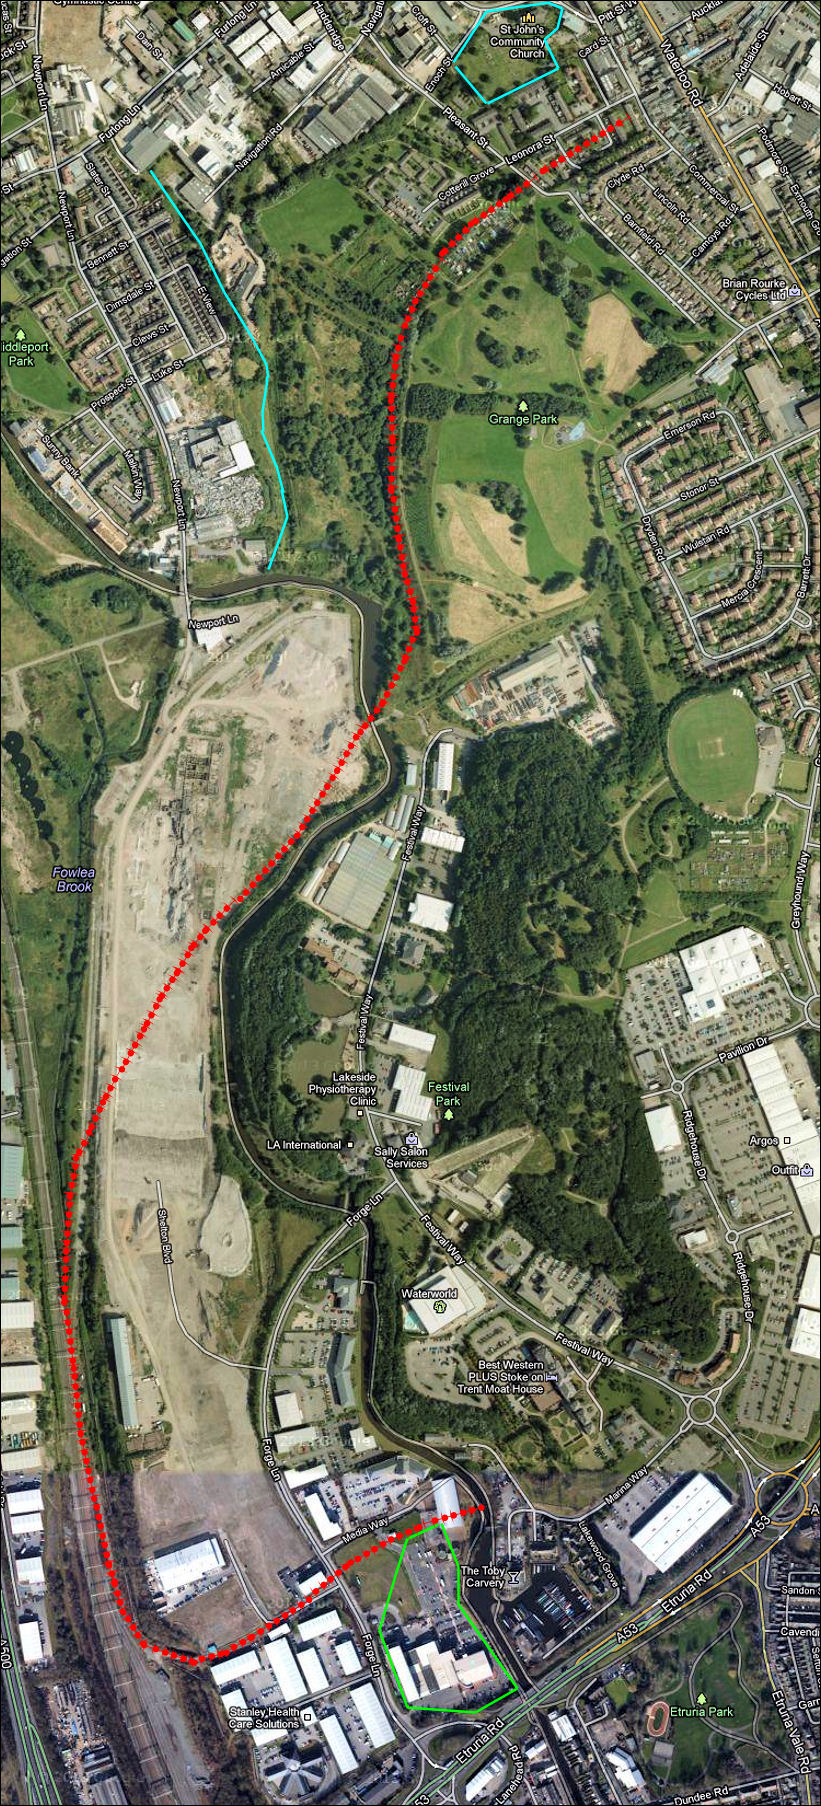 the route of the Grange Branch railway line shown in red on this Google map